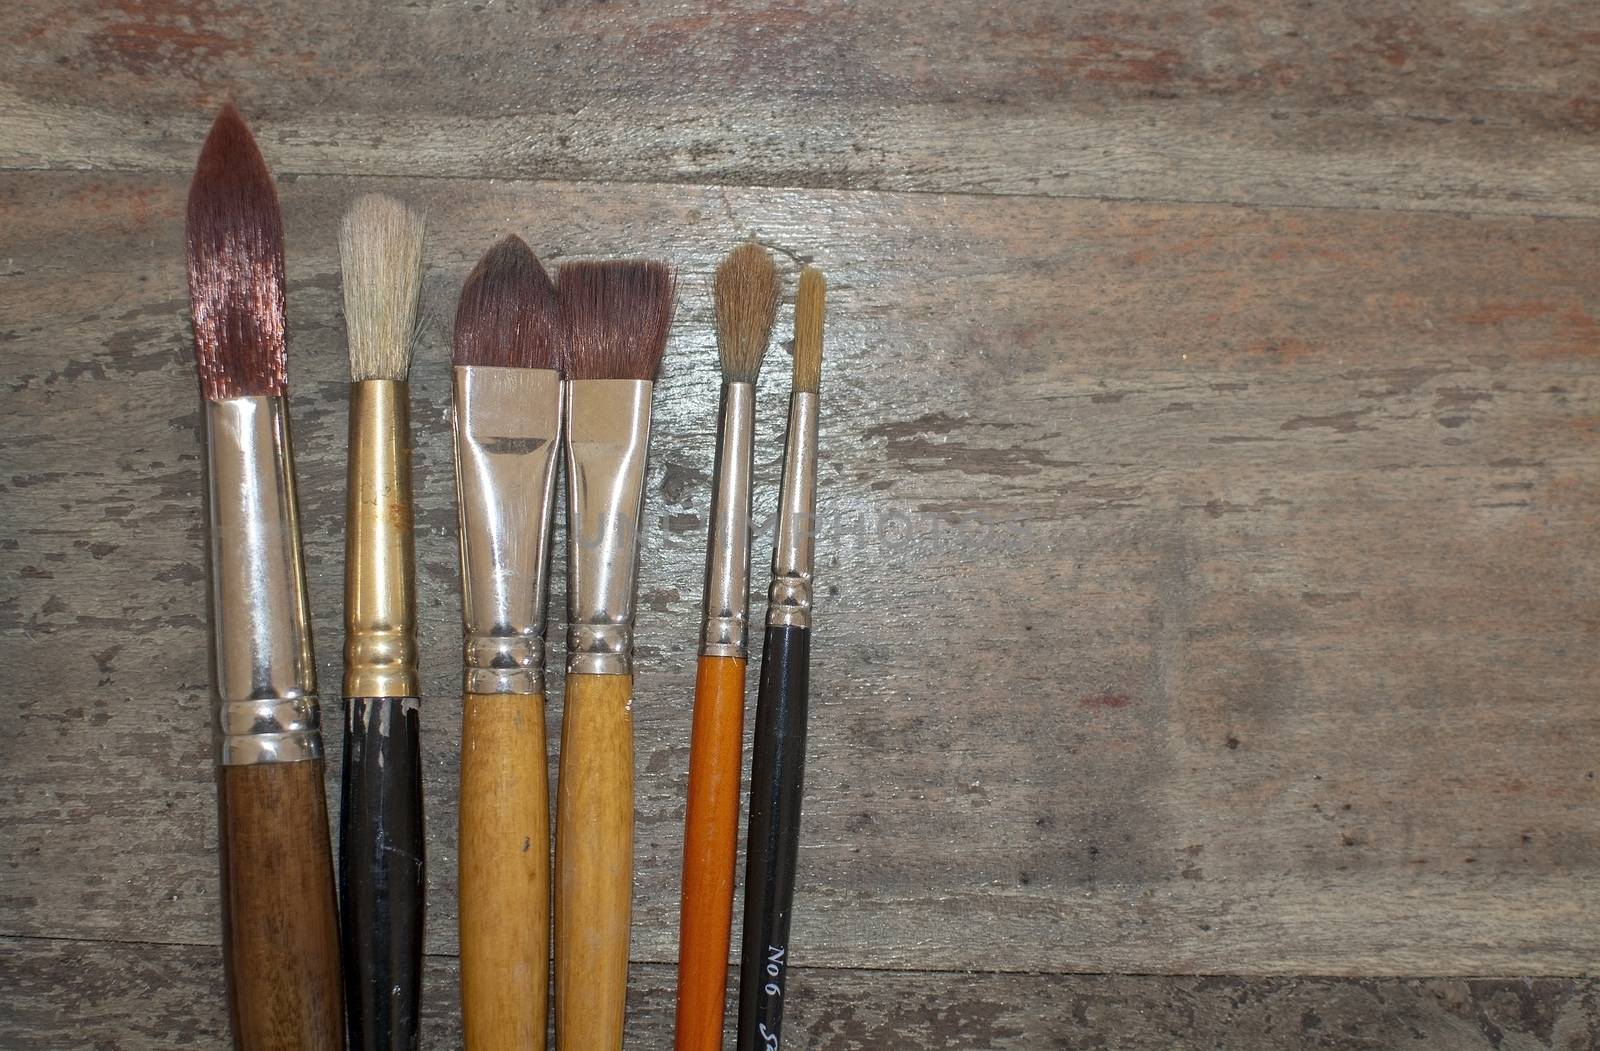 Set of various artist brushes for watercolor painting on wood by ArtesiaWells